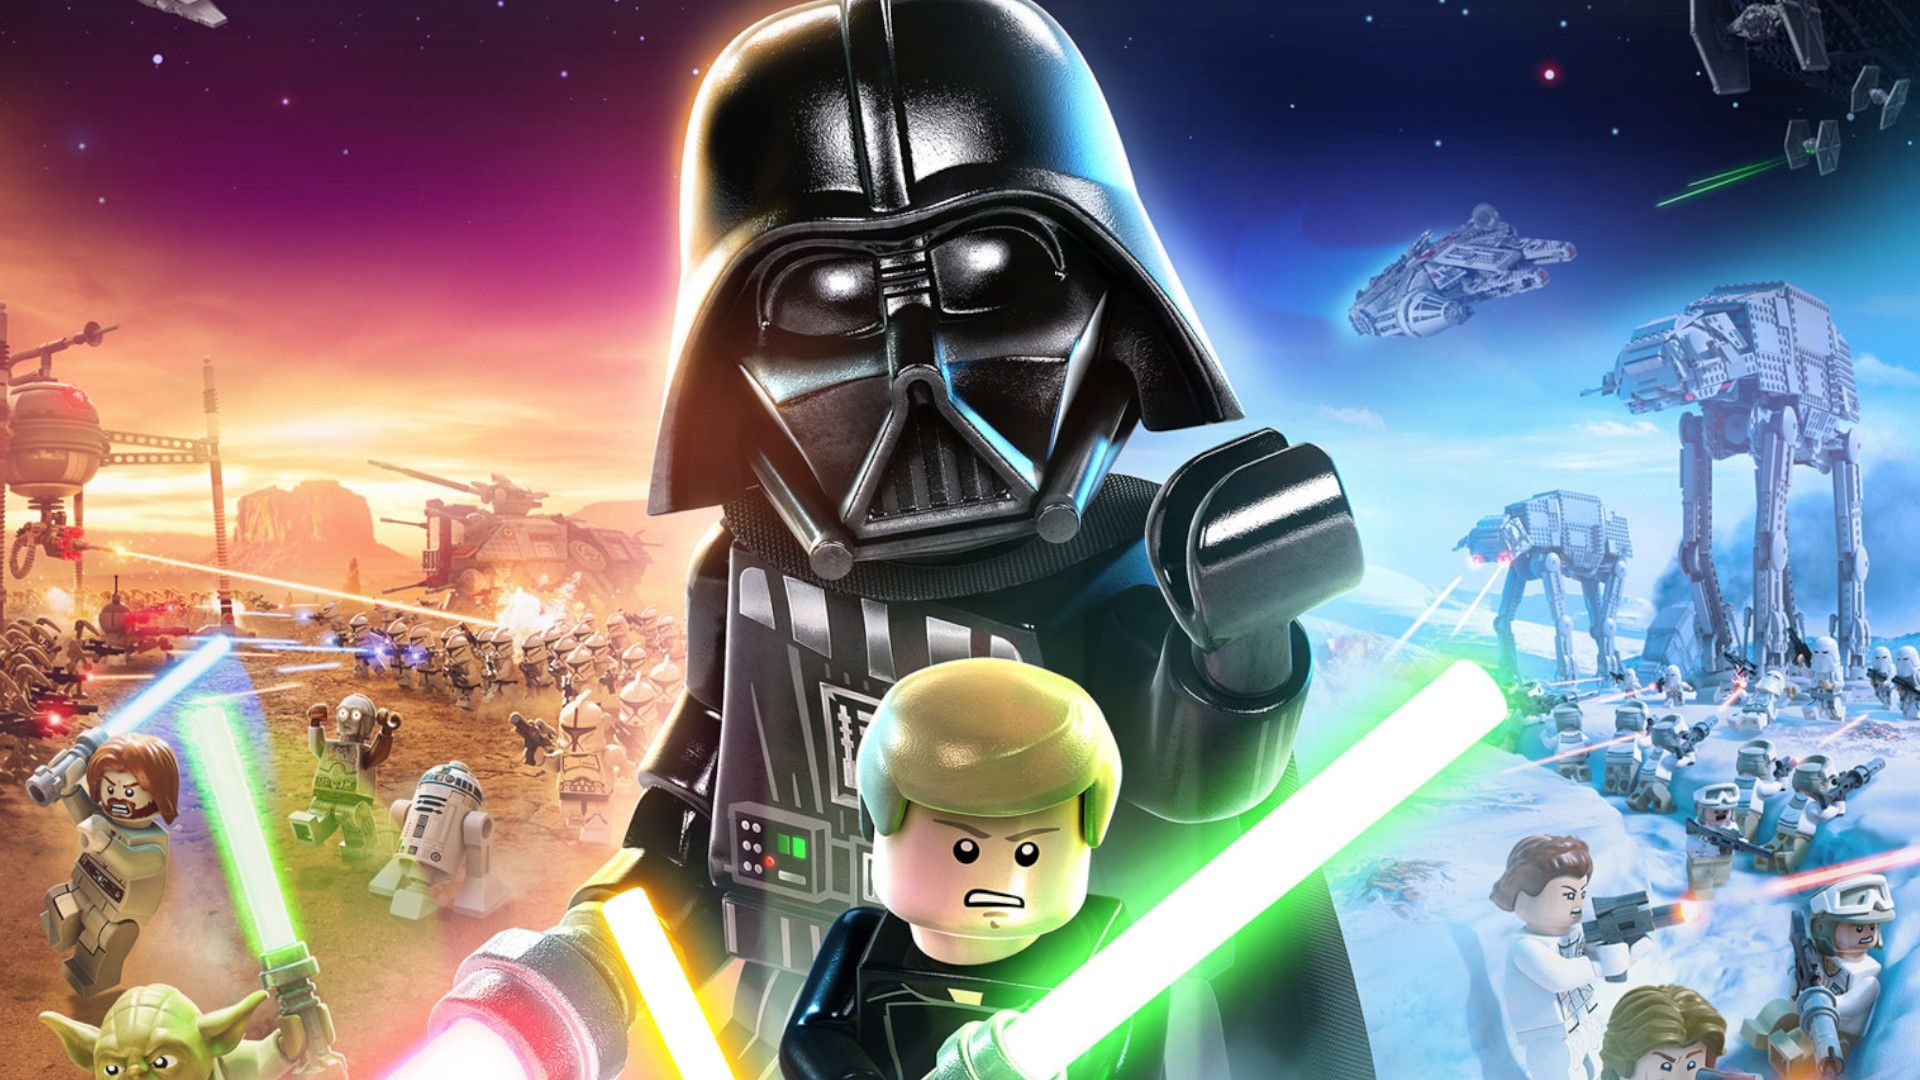 LEGO Star Wars wallpapers, Cool backgrounds, High-quality images, Ultimate collection, 1920x1080 Full HD Desktop